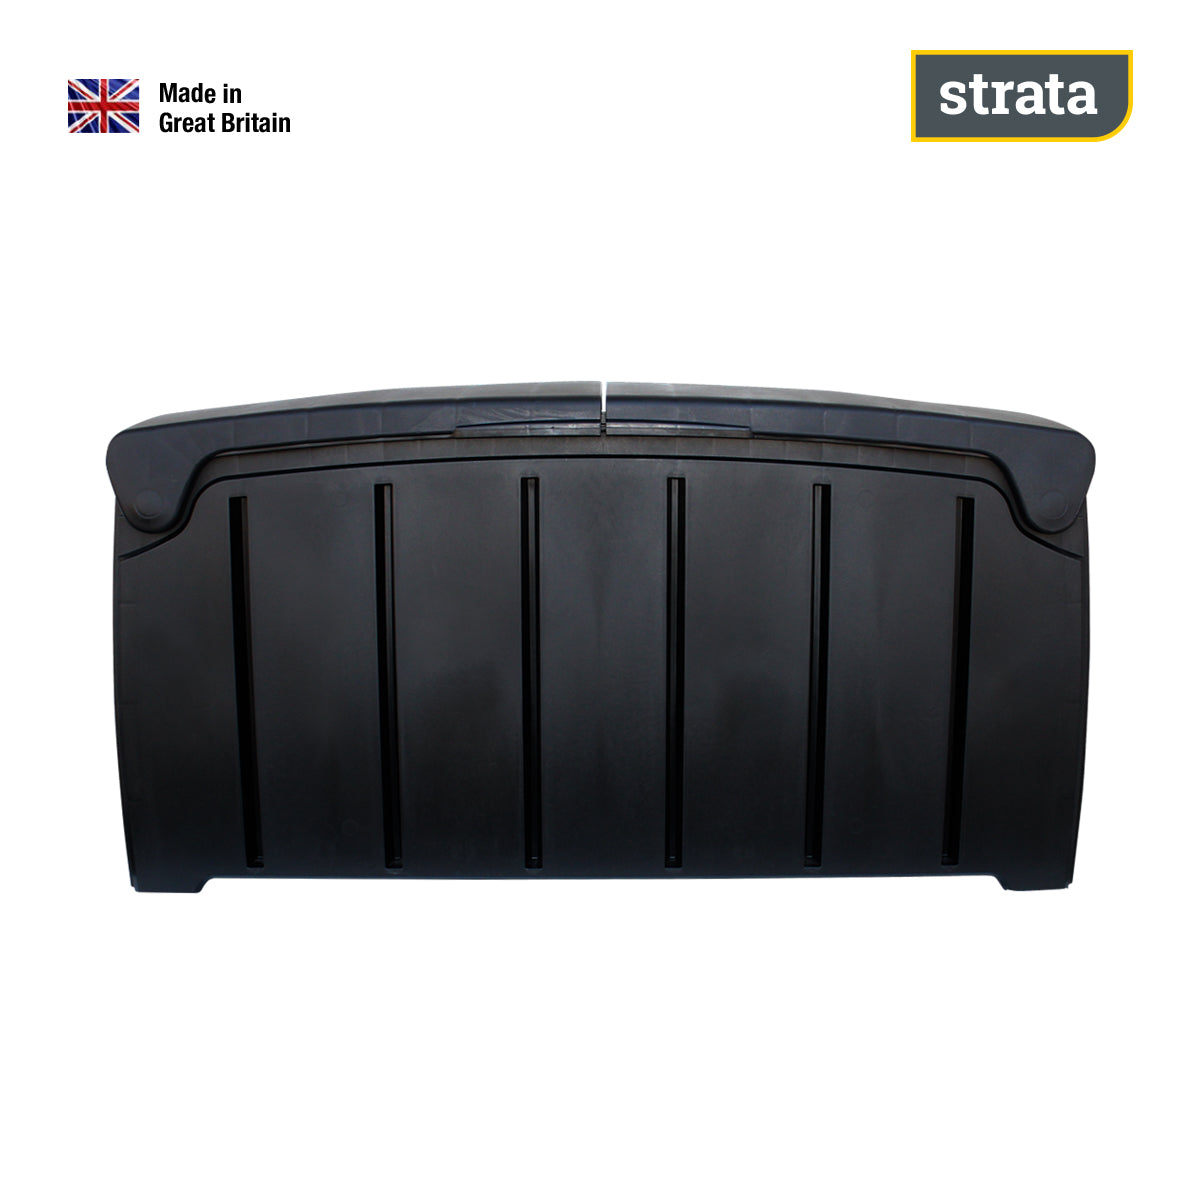 Easy armed garden storage trunk box 322 liters and 480 kilos of cargo Strata GN220